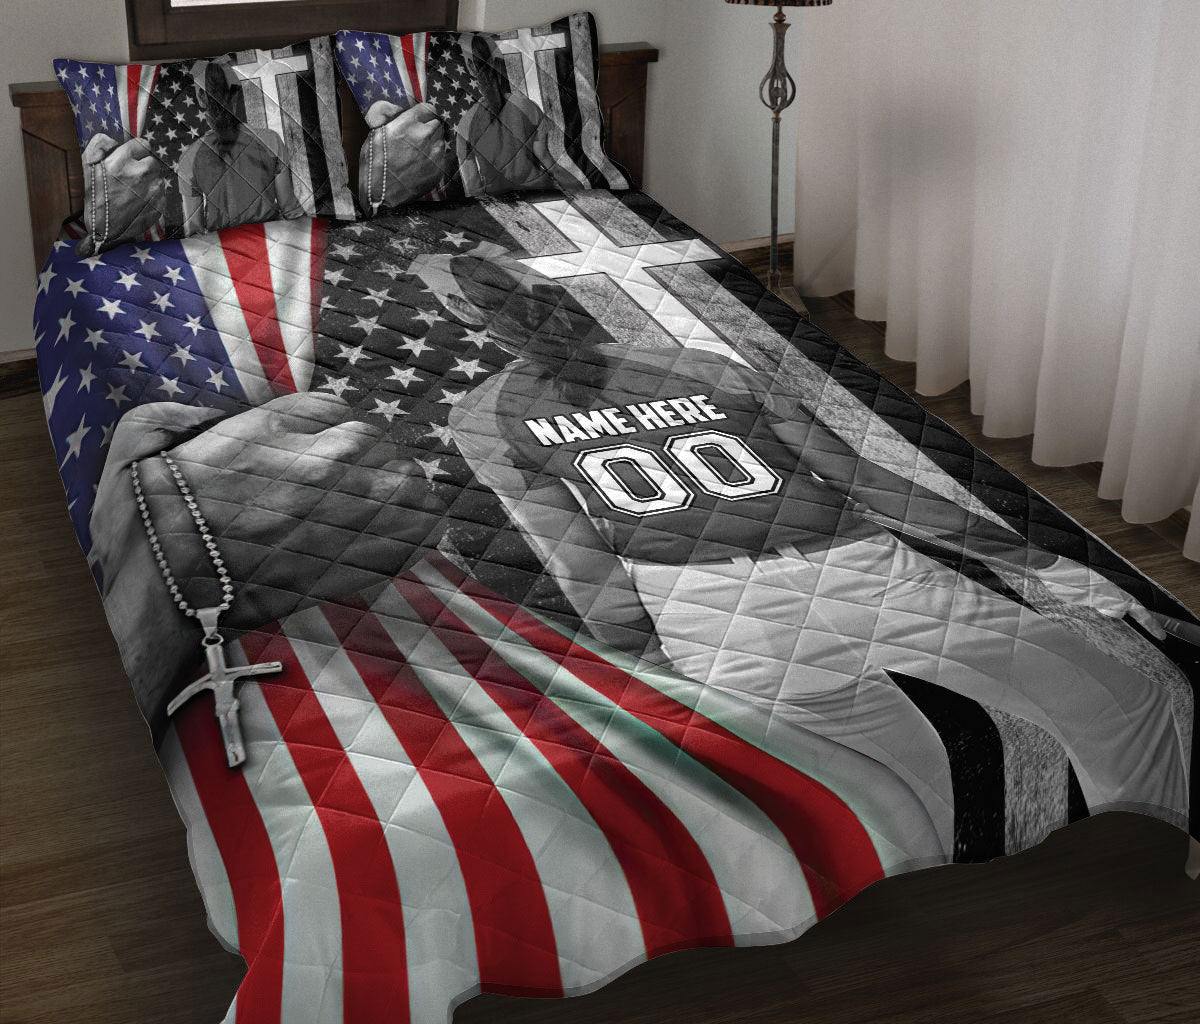 Ohaprints-Quilt-Bed-Set-Pillowcase-Softball-Player-Christian-American-Flag-Cross-Custom-Personalized-Name-Number-Blanket-Bedspread-Bedding-3075-Throw (55'' x 60'')